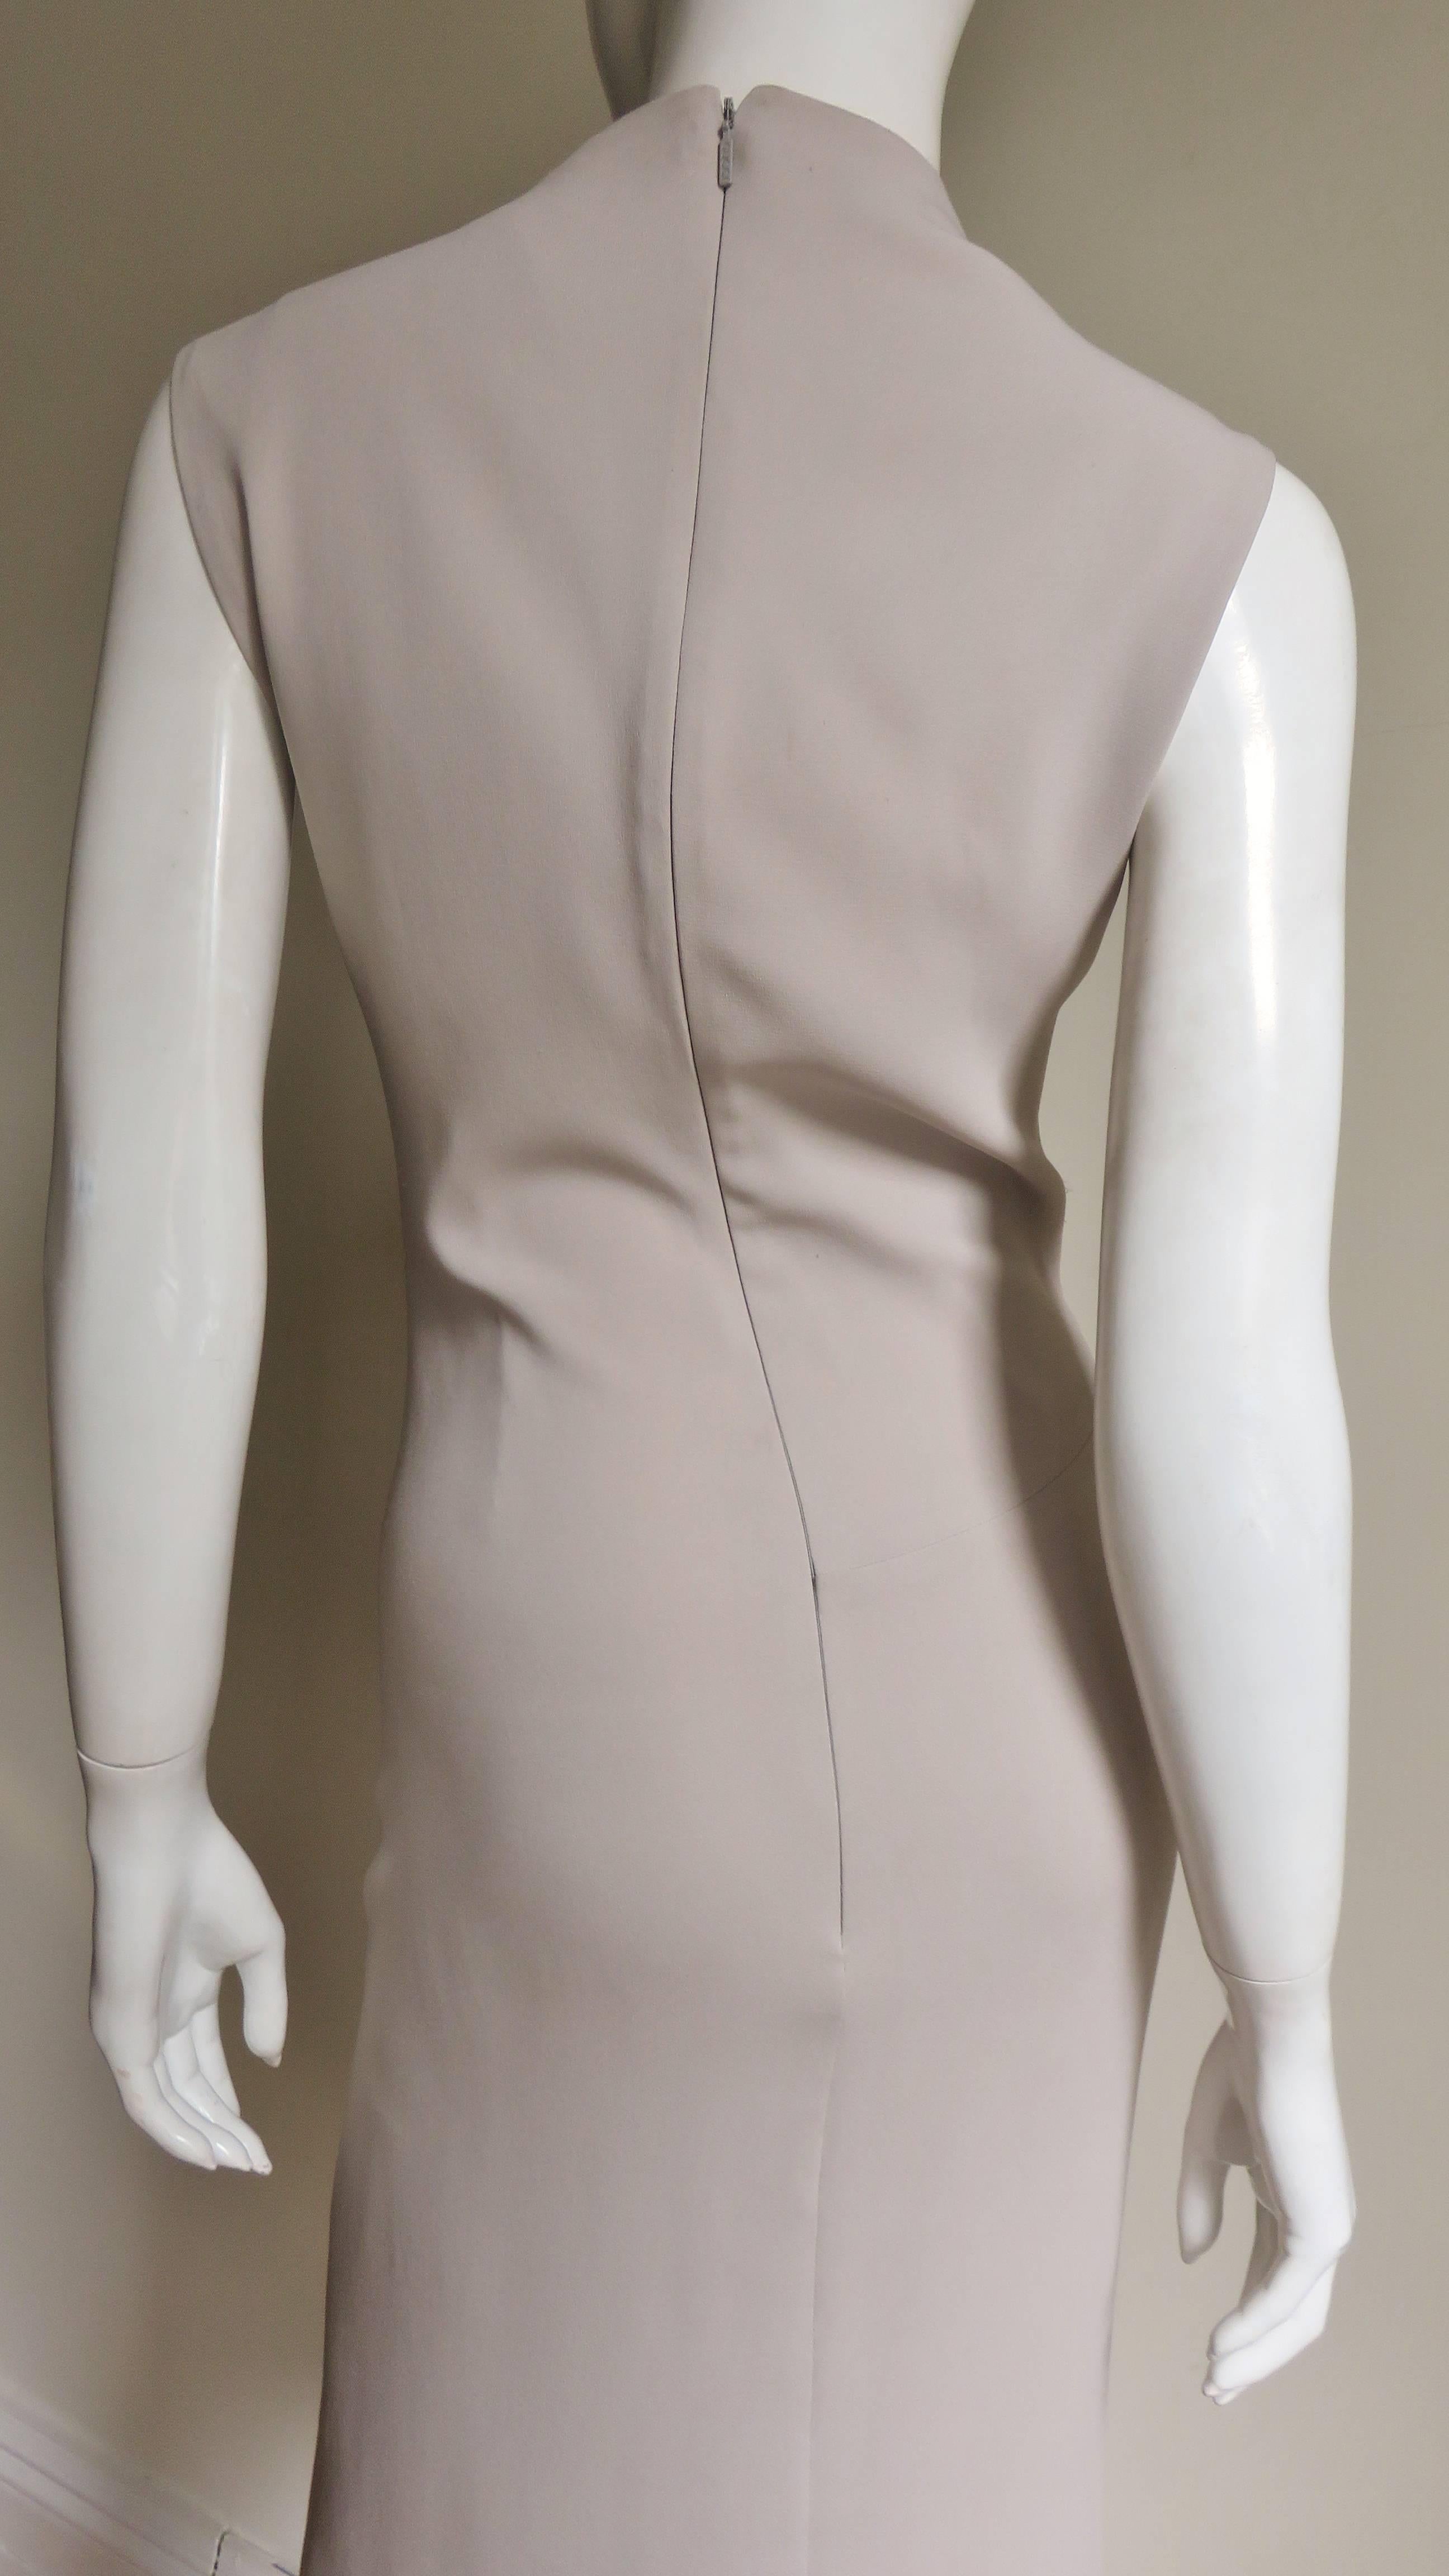 Gucci Tom Ford Cut out Dress with Metal Collar 6